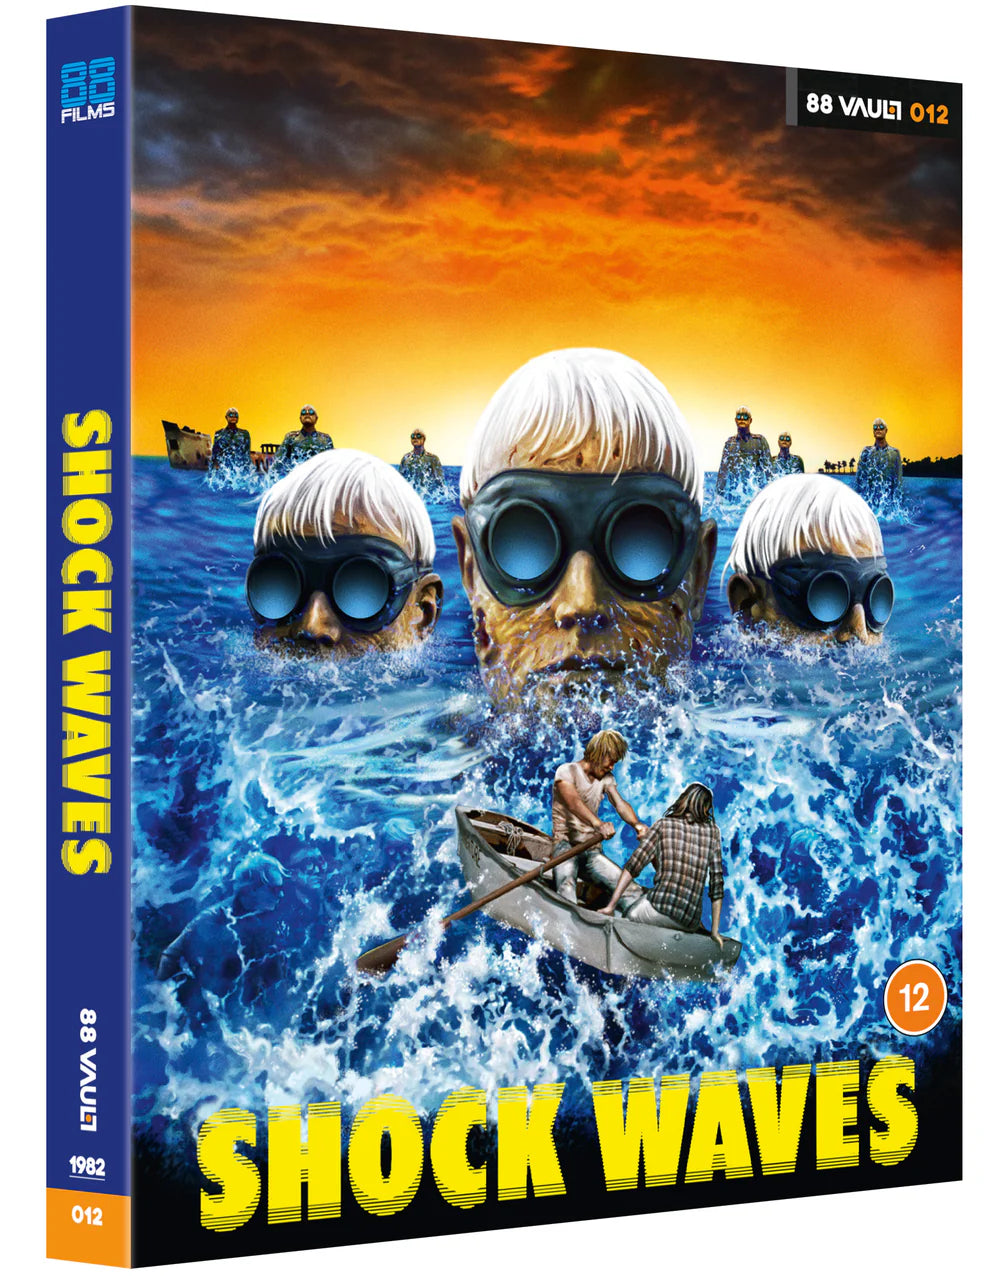 Shockwaves Blu-ray with Slipcover (88 Films/Region B) – The Atomic 